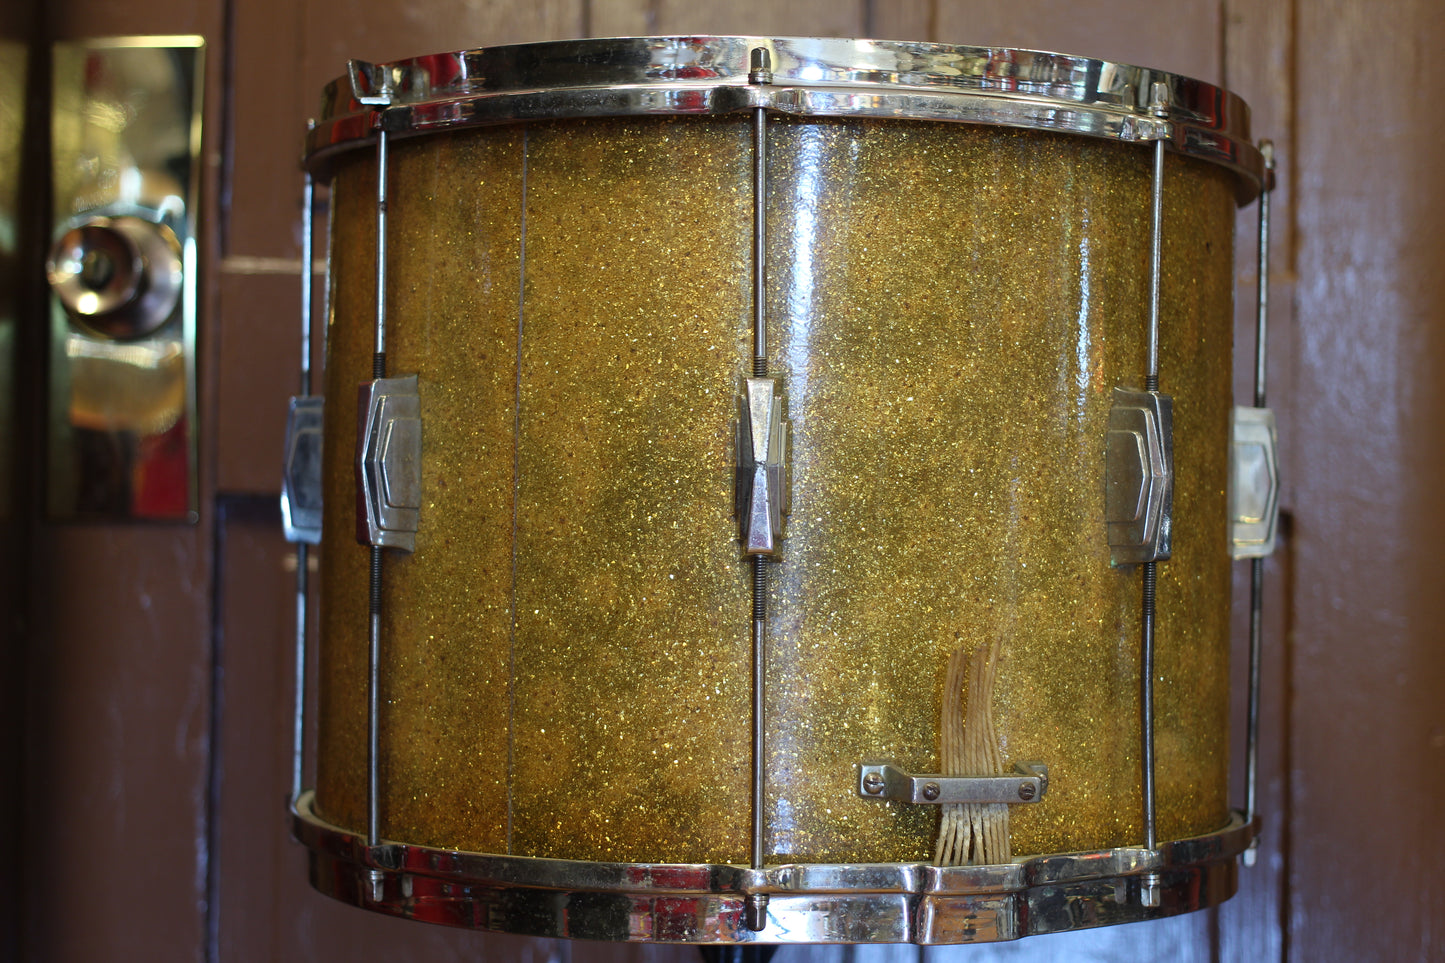 1946 Ludwig & Ludwig 12"x15" Triumphal Parade Drum in Gold Flash Pearl